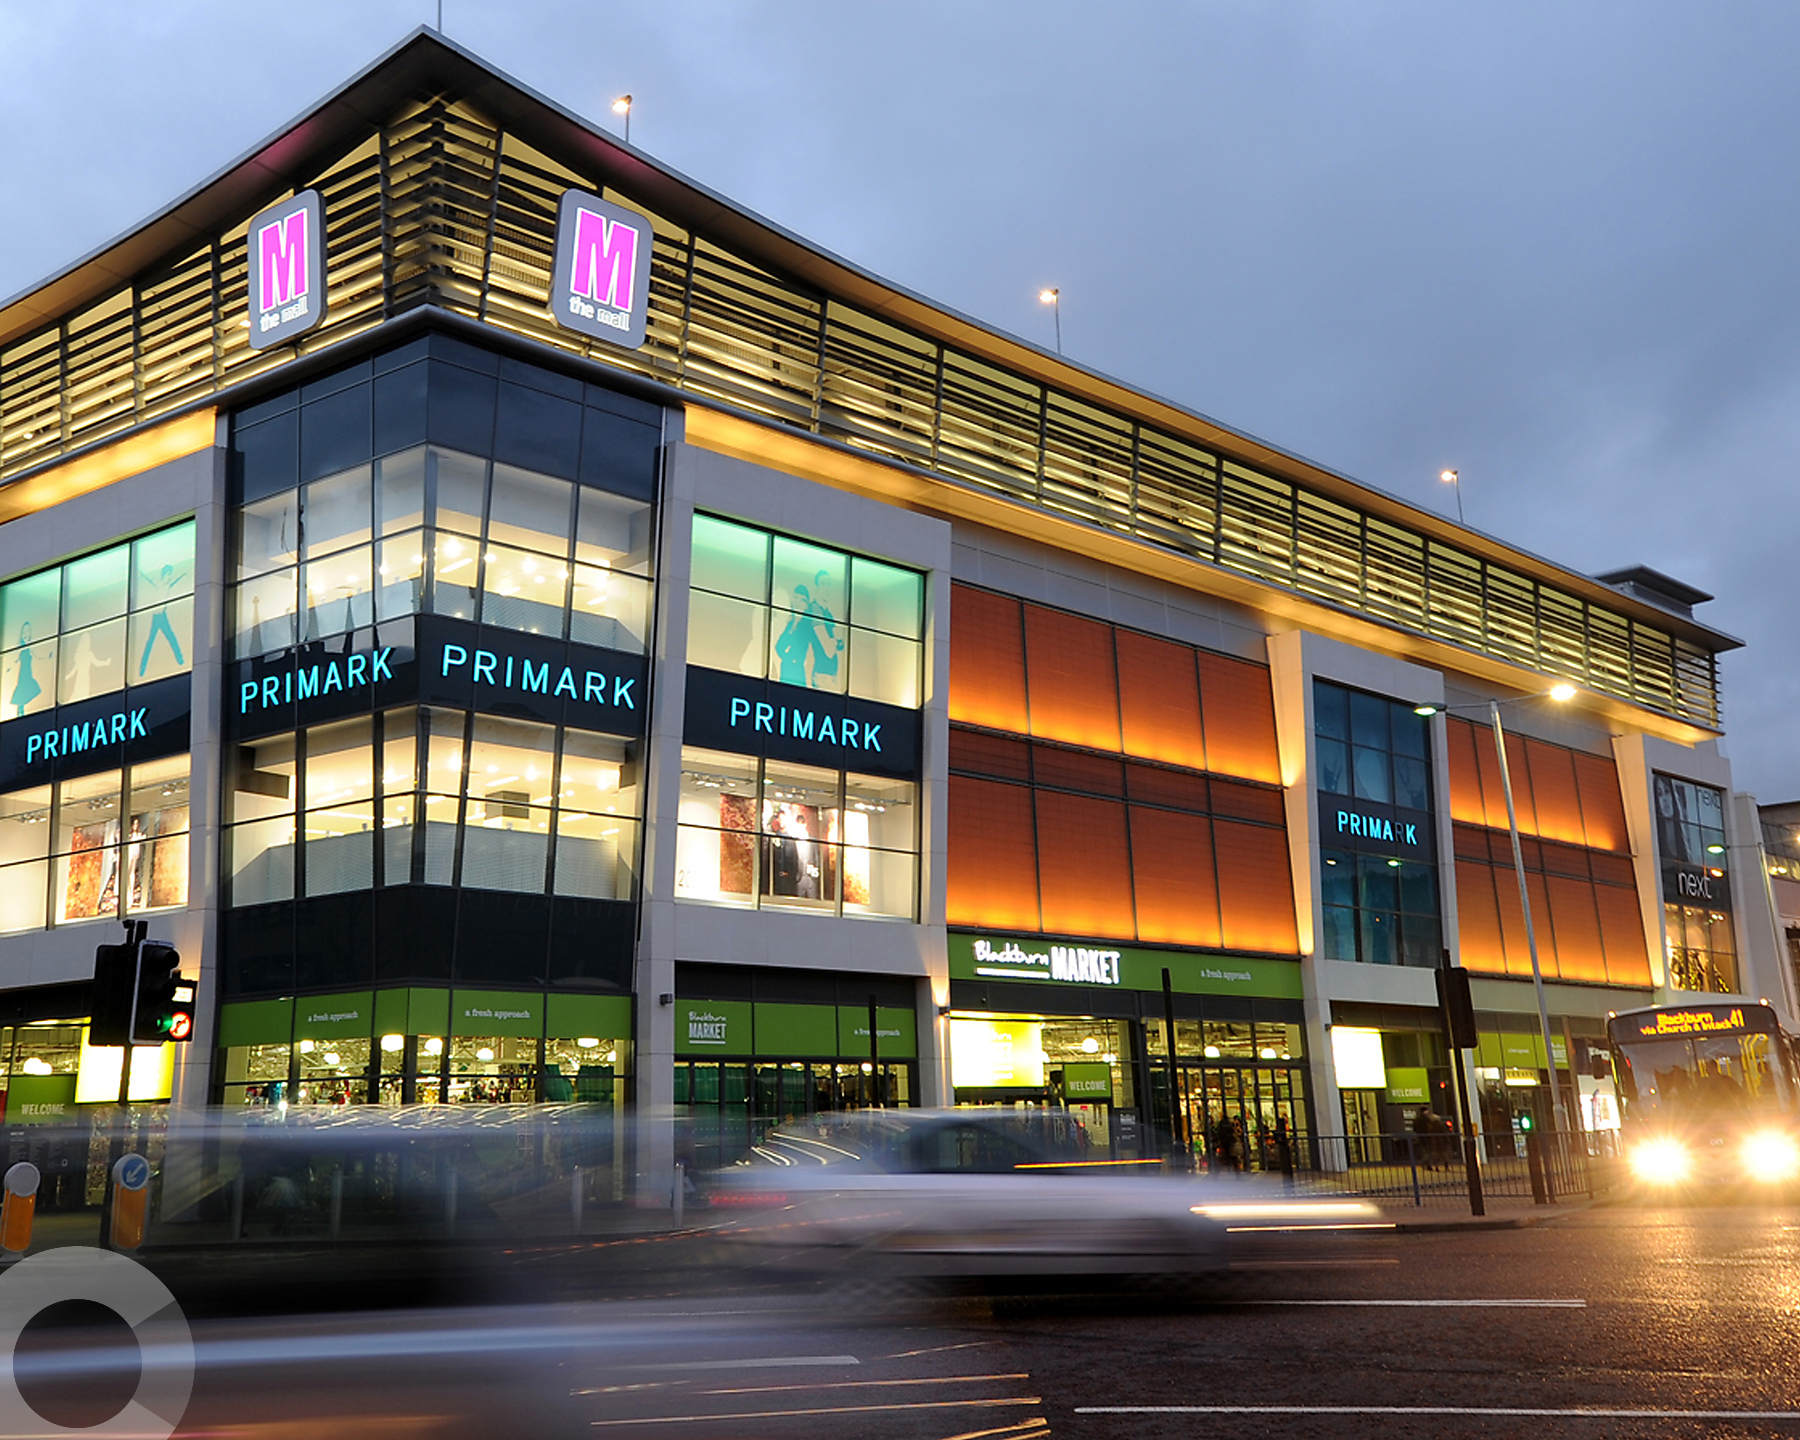 The Mall, Blackburn - Completely Retail